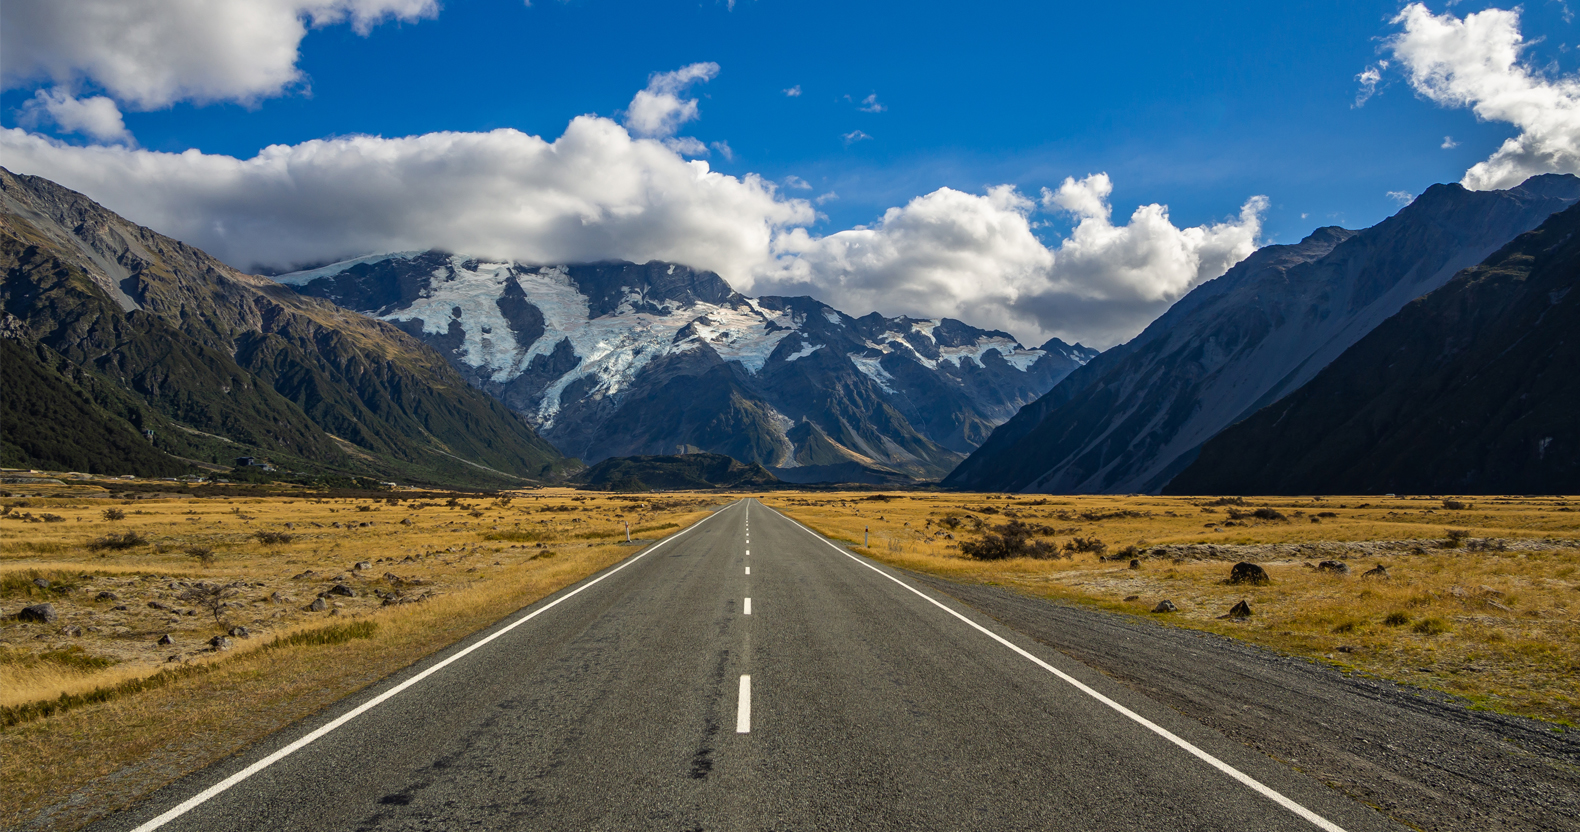 20 New Zealand pictures that’ll fuel your wanderlust!